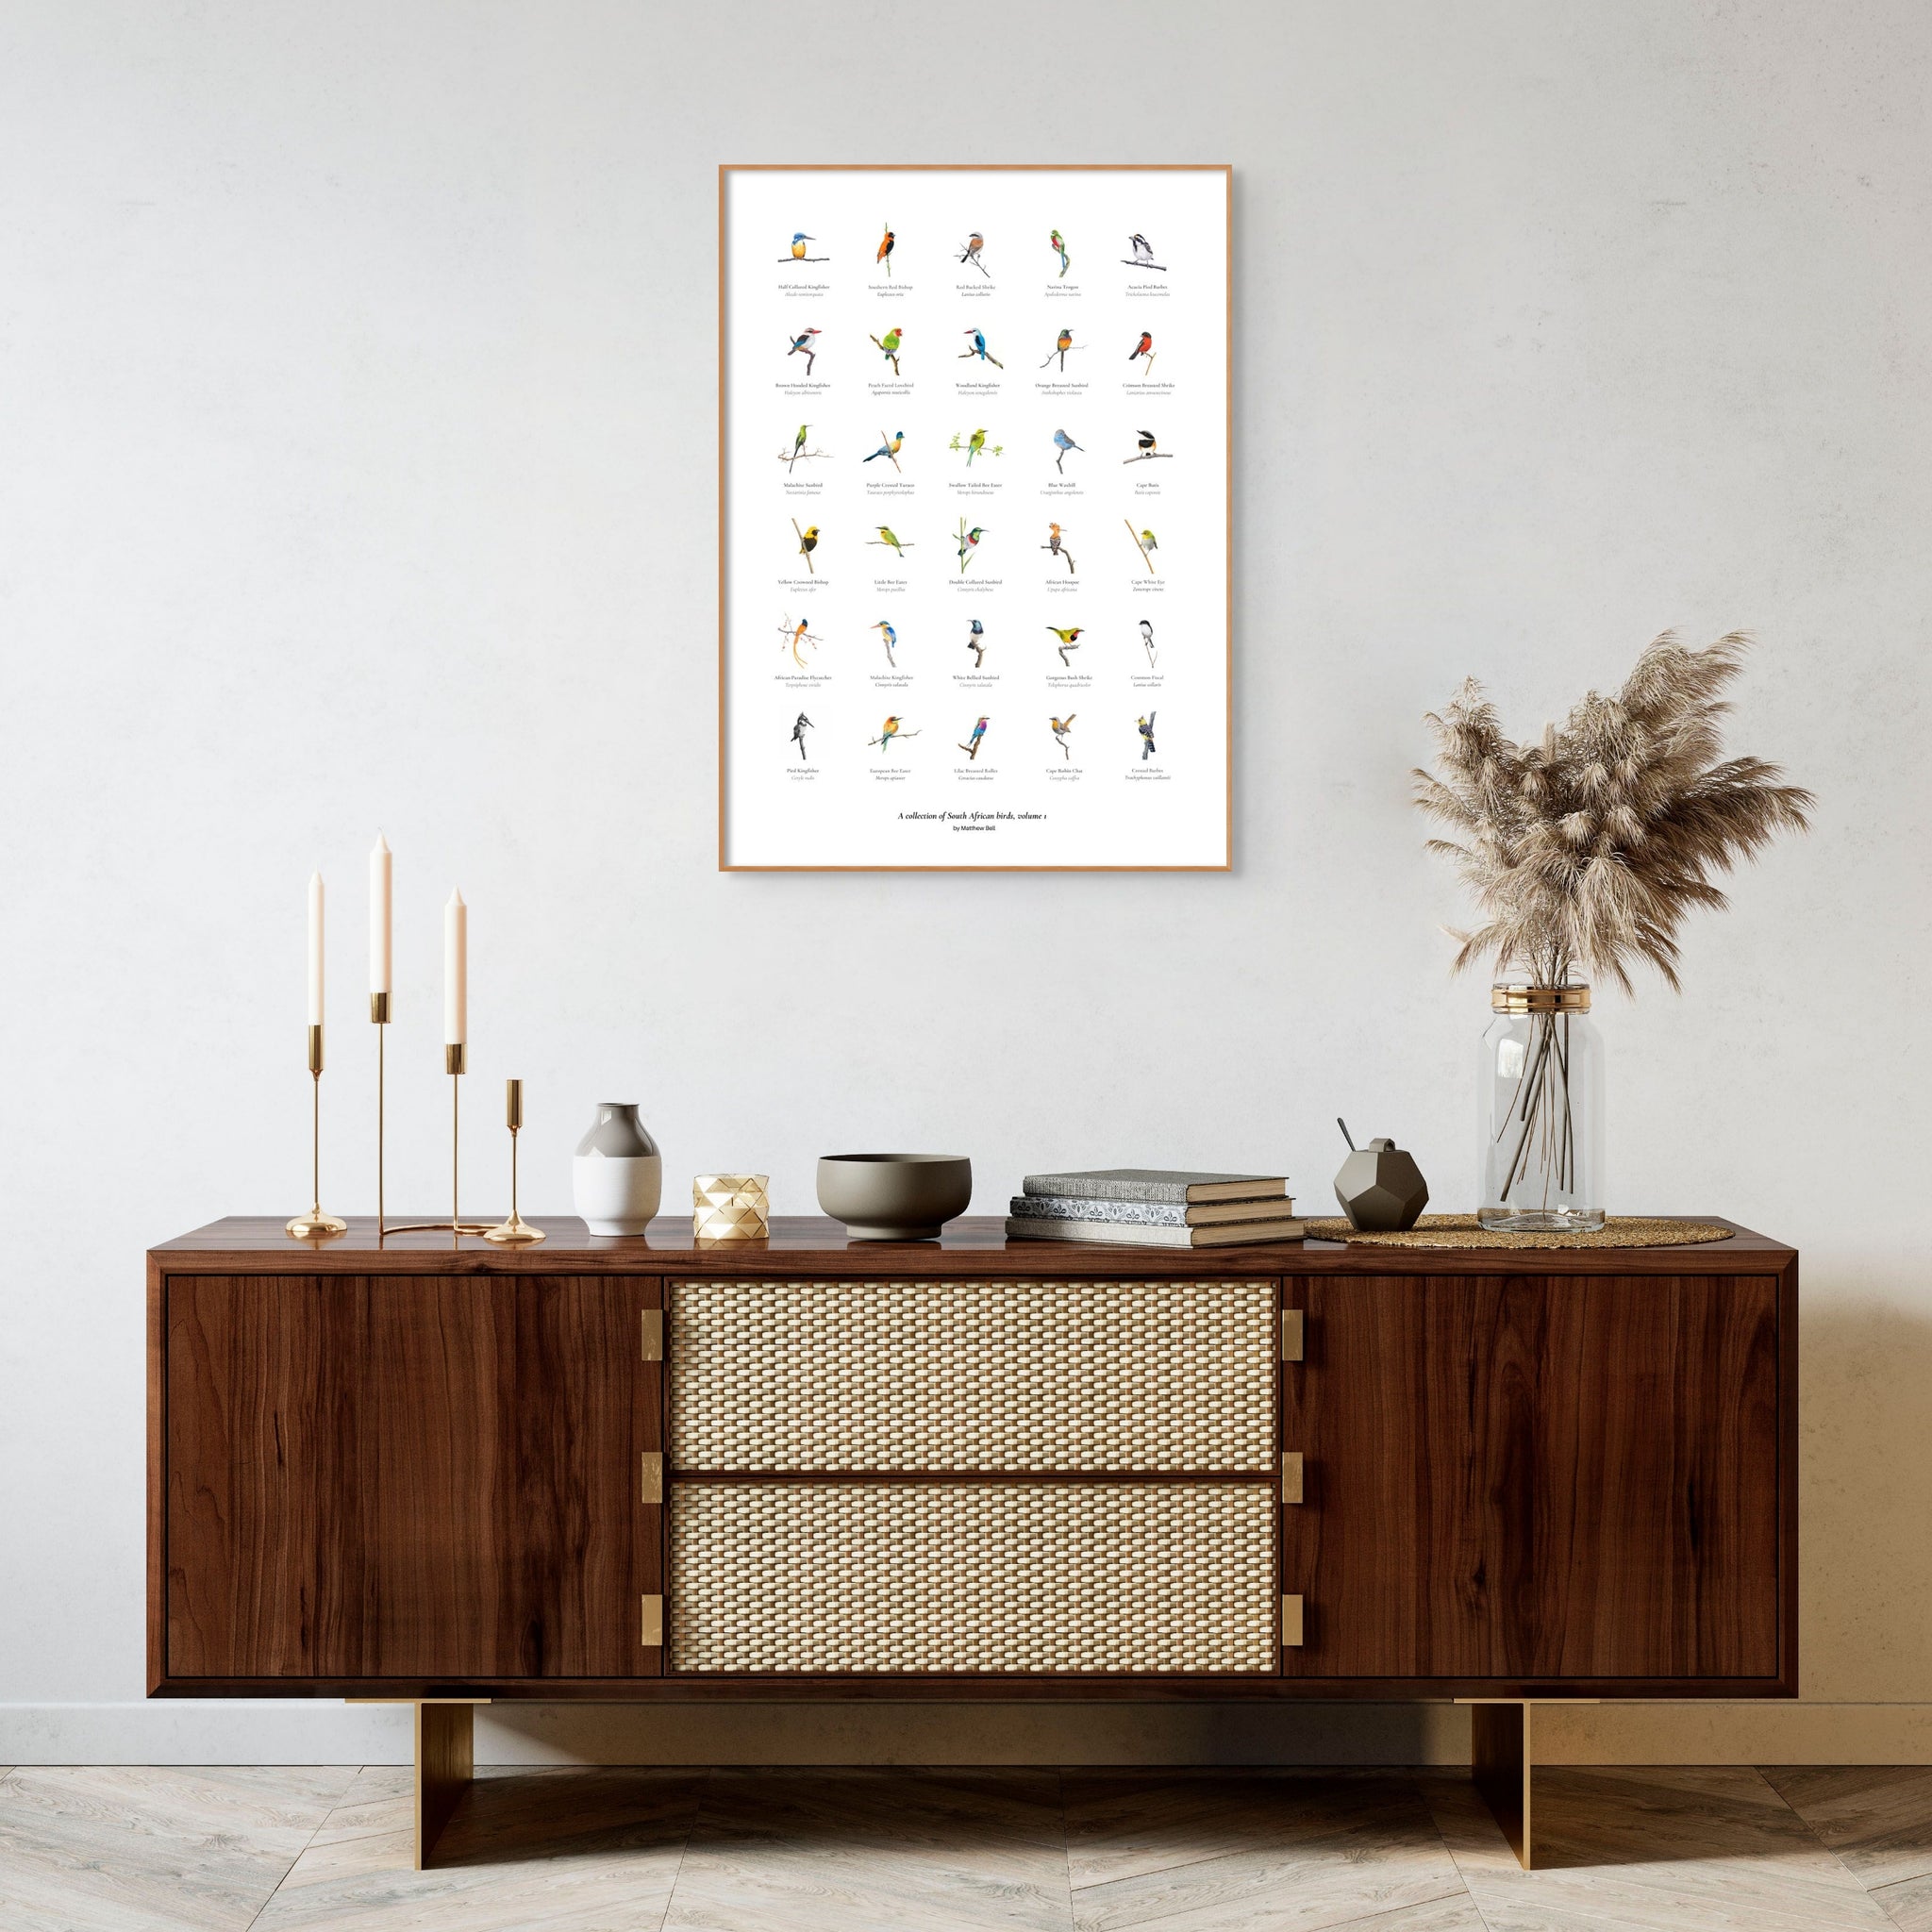 A collection of South African birds poster artwork by wildlife artist Matthew Bell